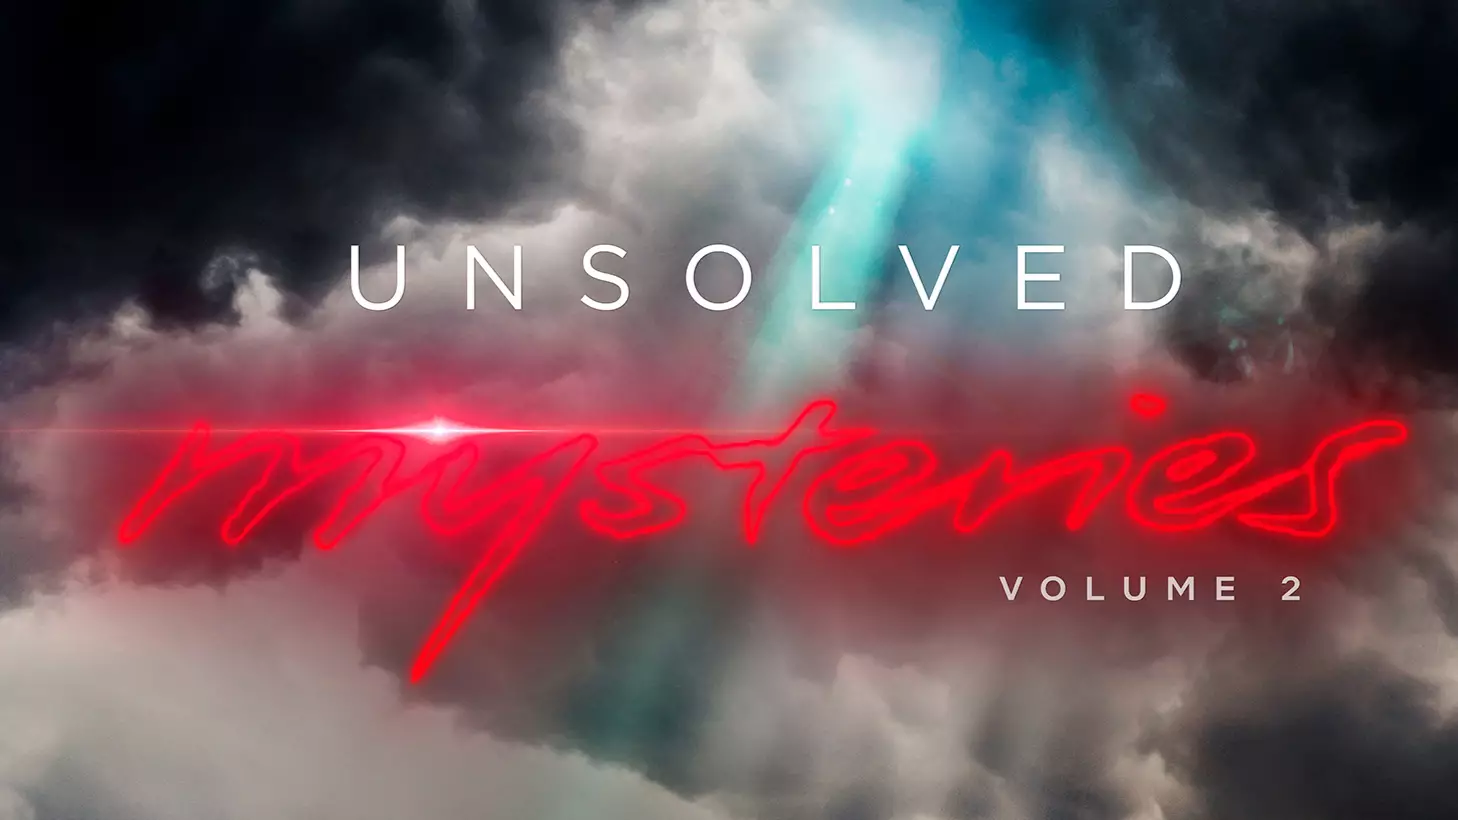 Volume Two Of Netflix's Unsolved Mysteries Is Out Today 